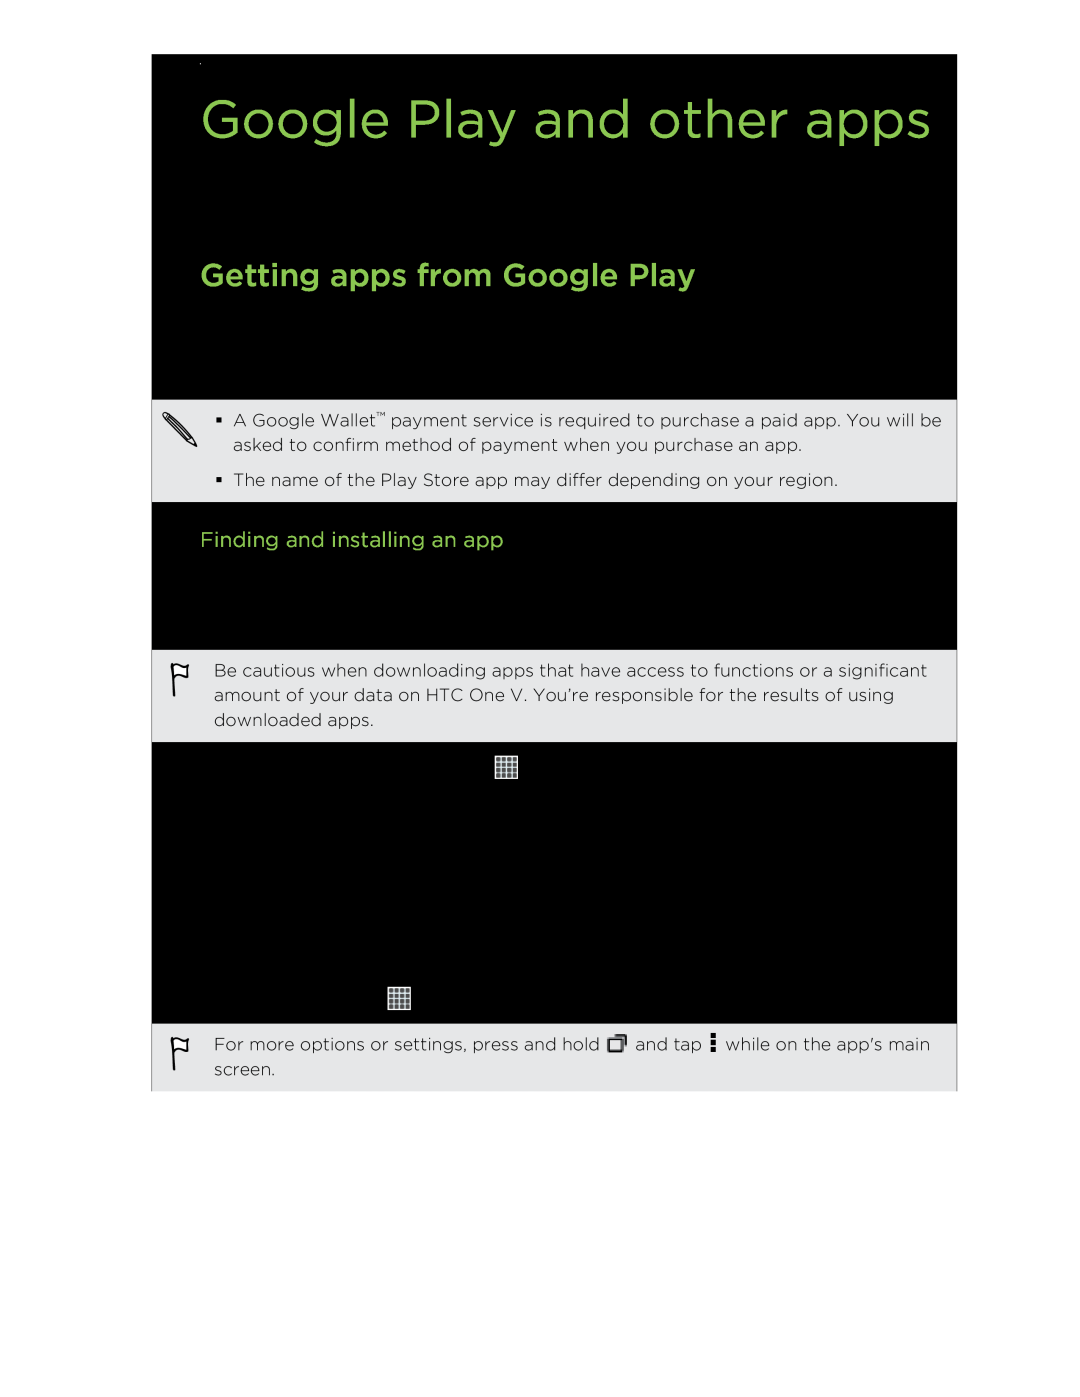 HTC C3HTCONEV4GBUNLOCKEDBLACK Google Play and other apps, Getting apps from Google Play, Finding and installing an app 